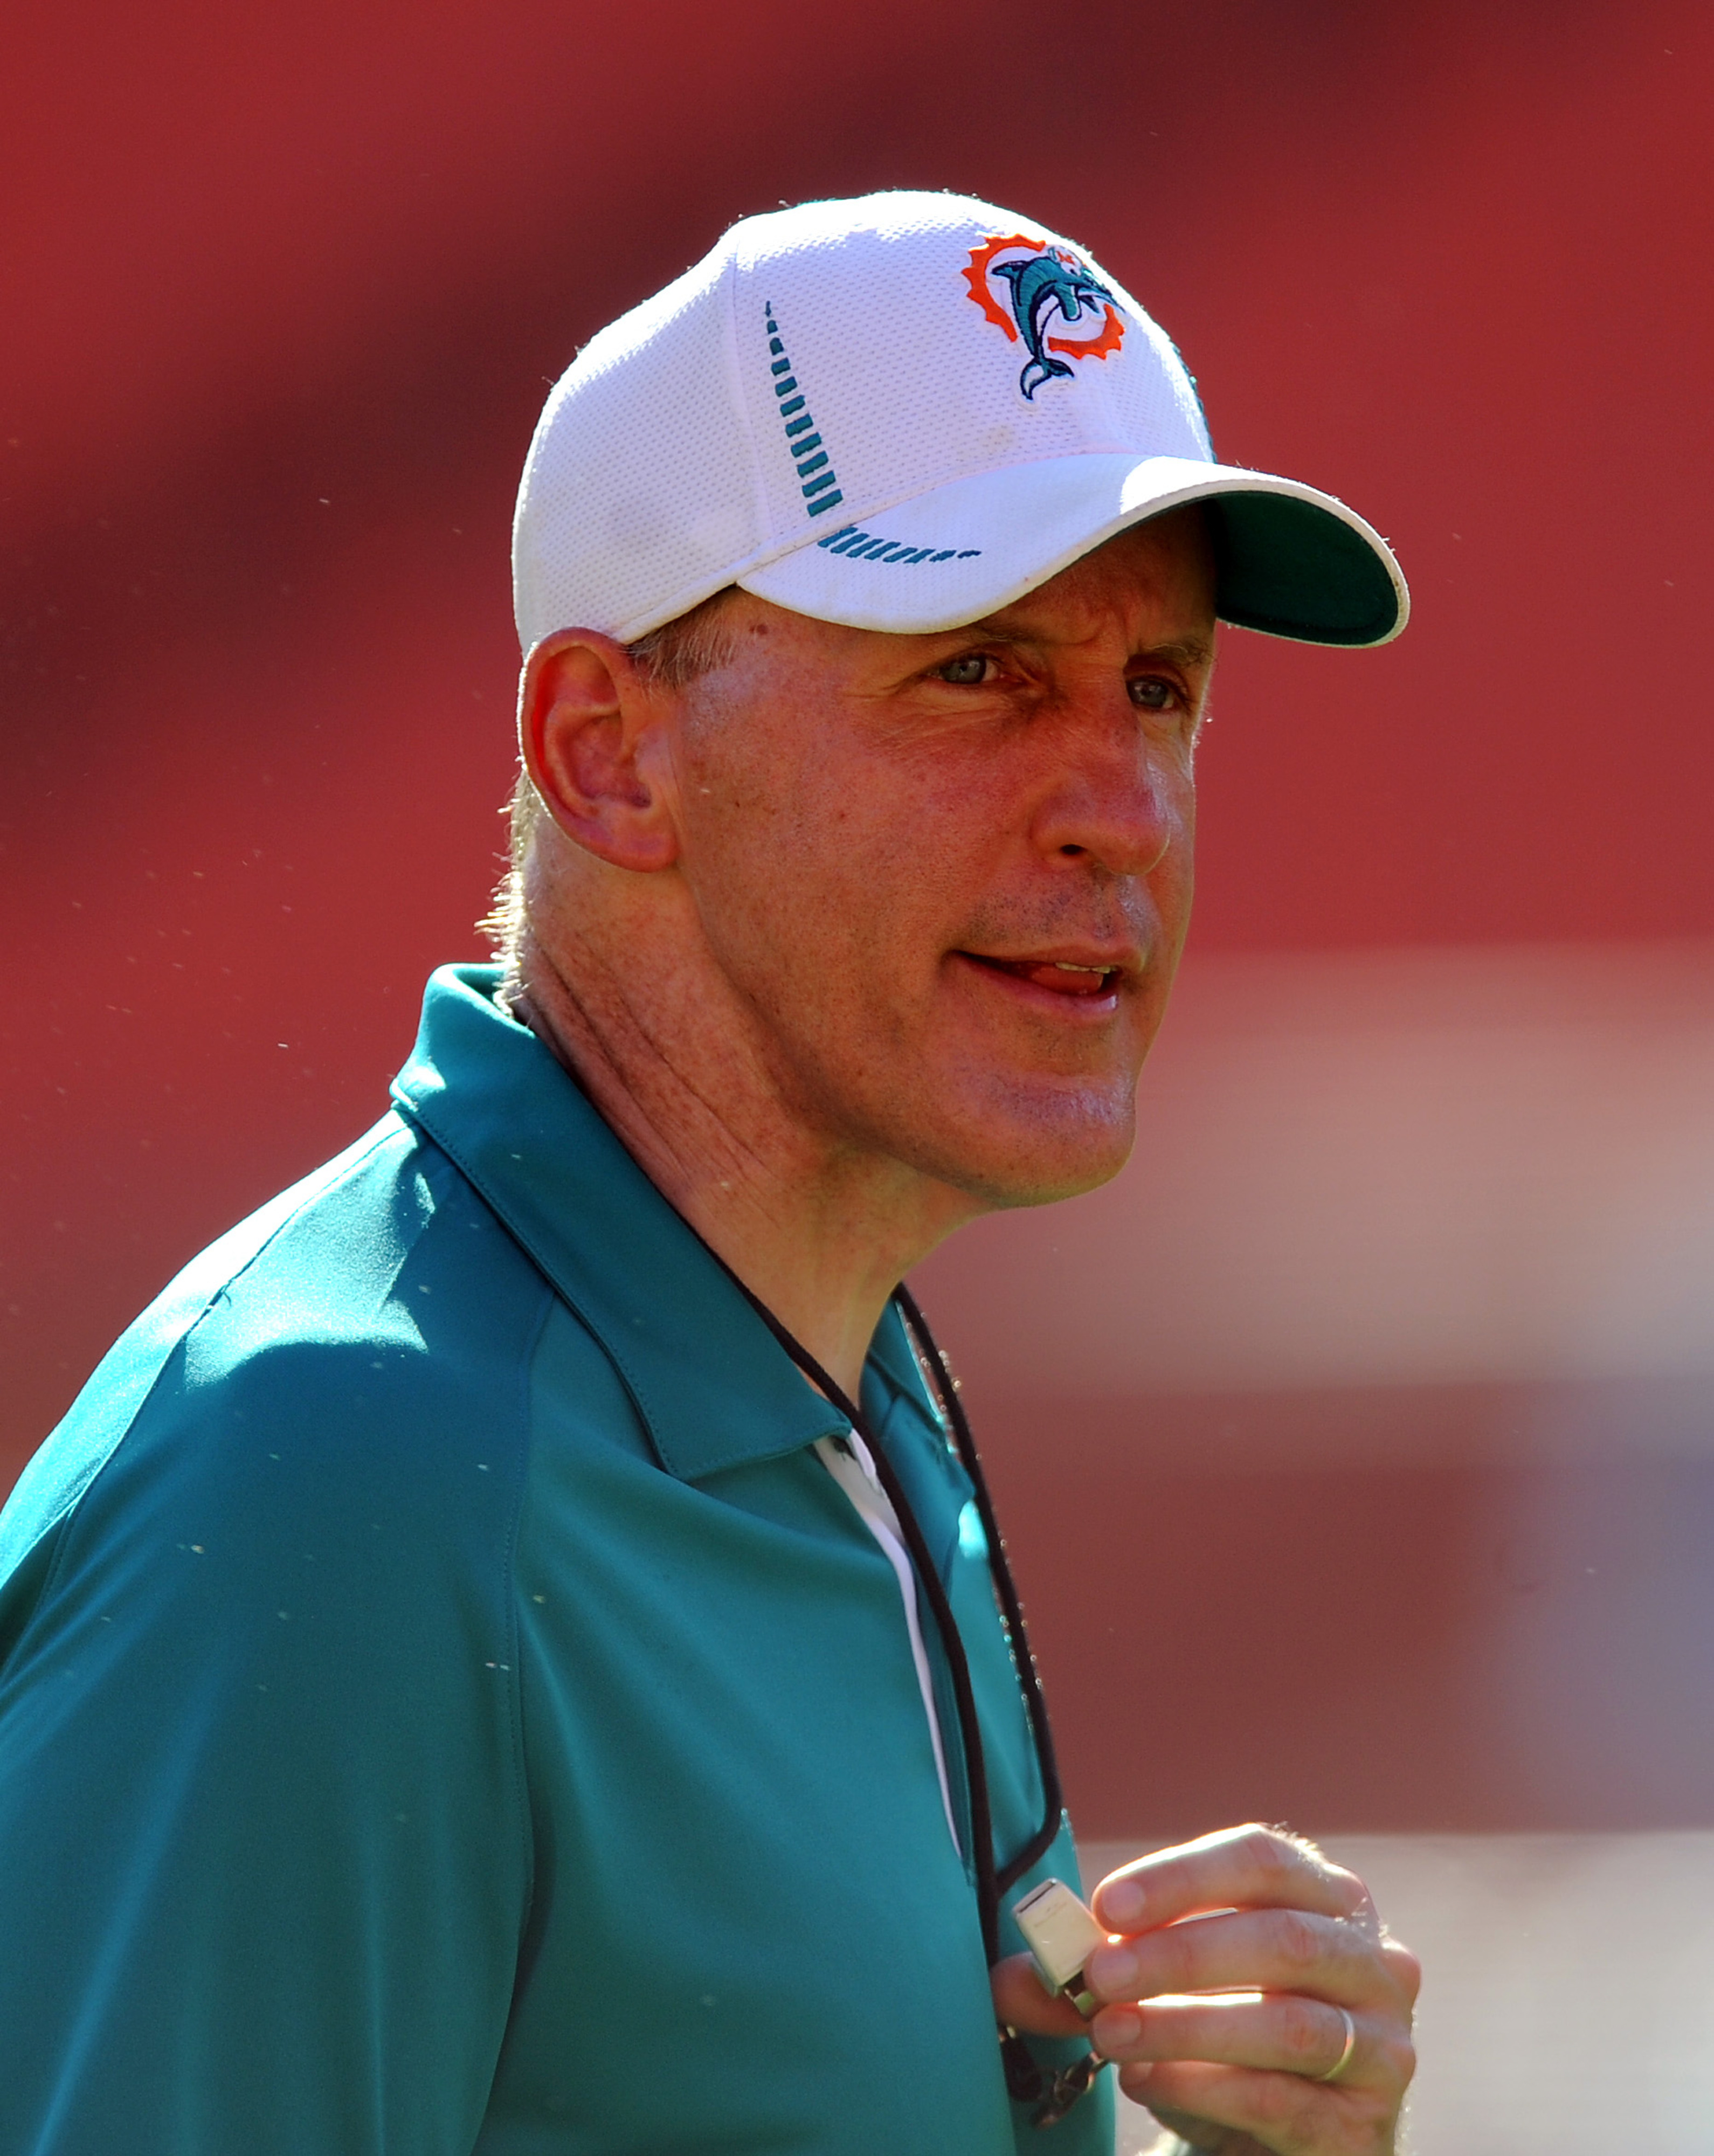 Miami Dolphins head coach Joe Philbin once again starred in an episode of Hard Knocks.